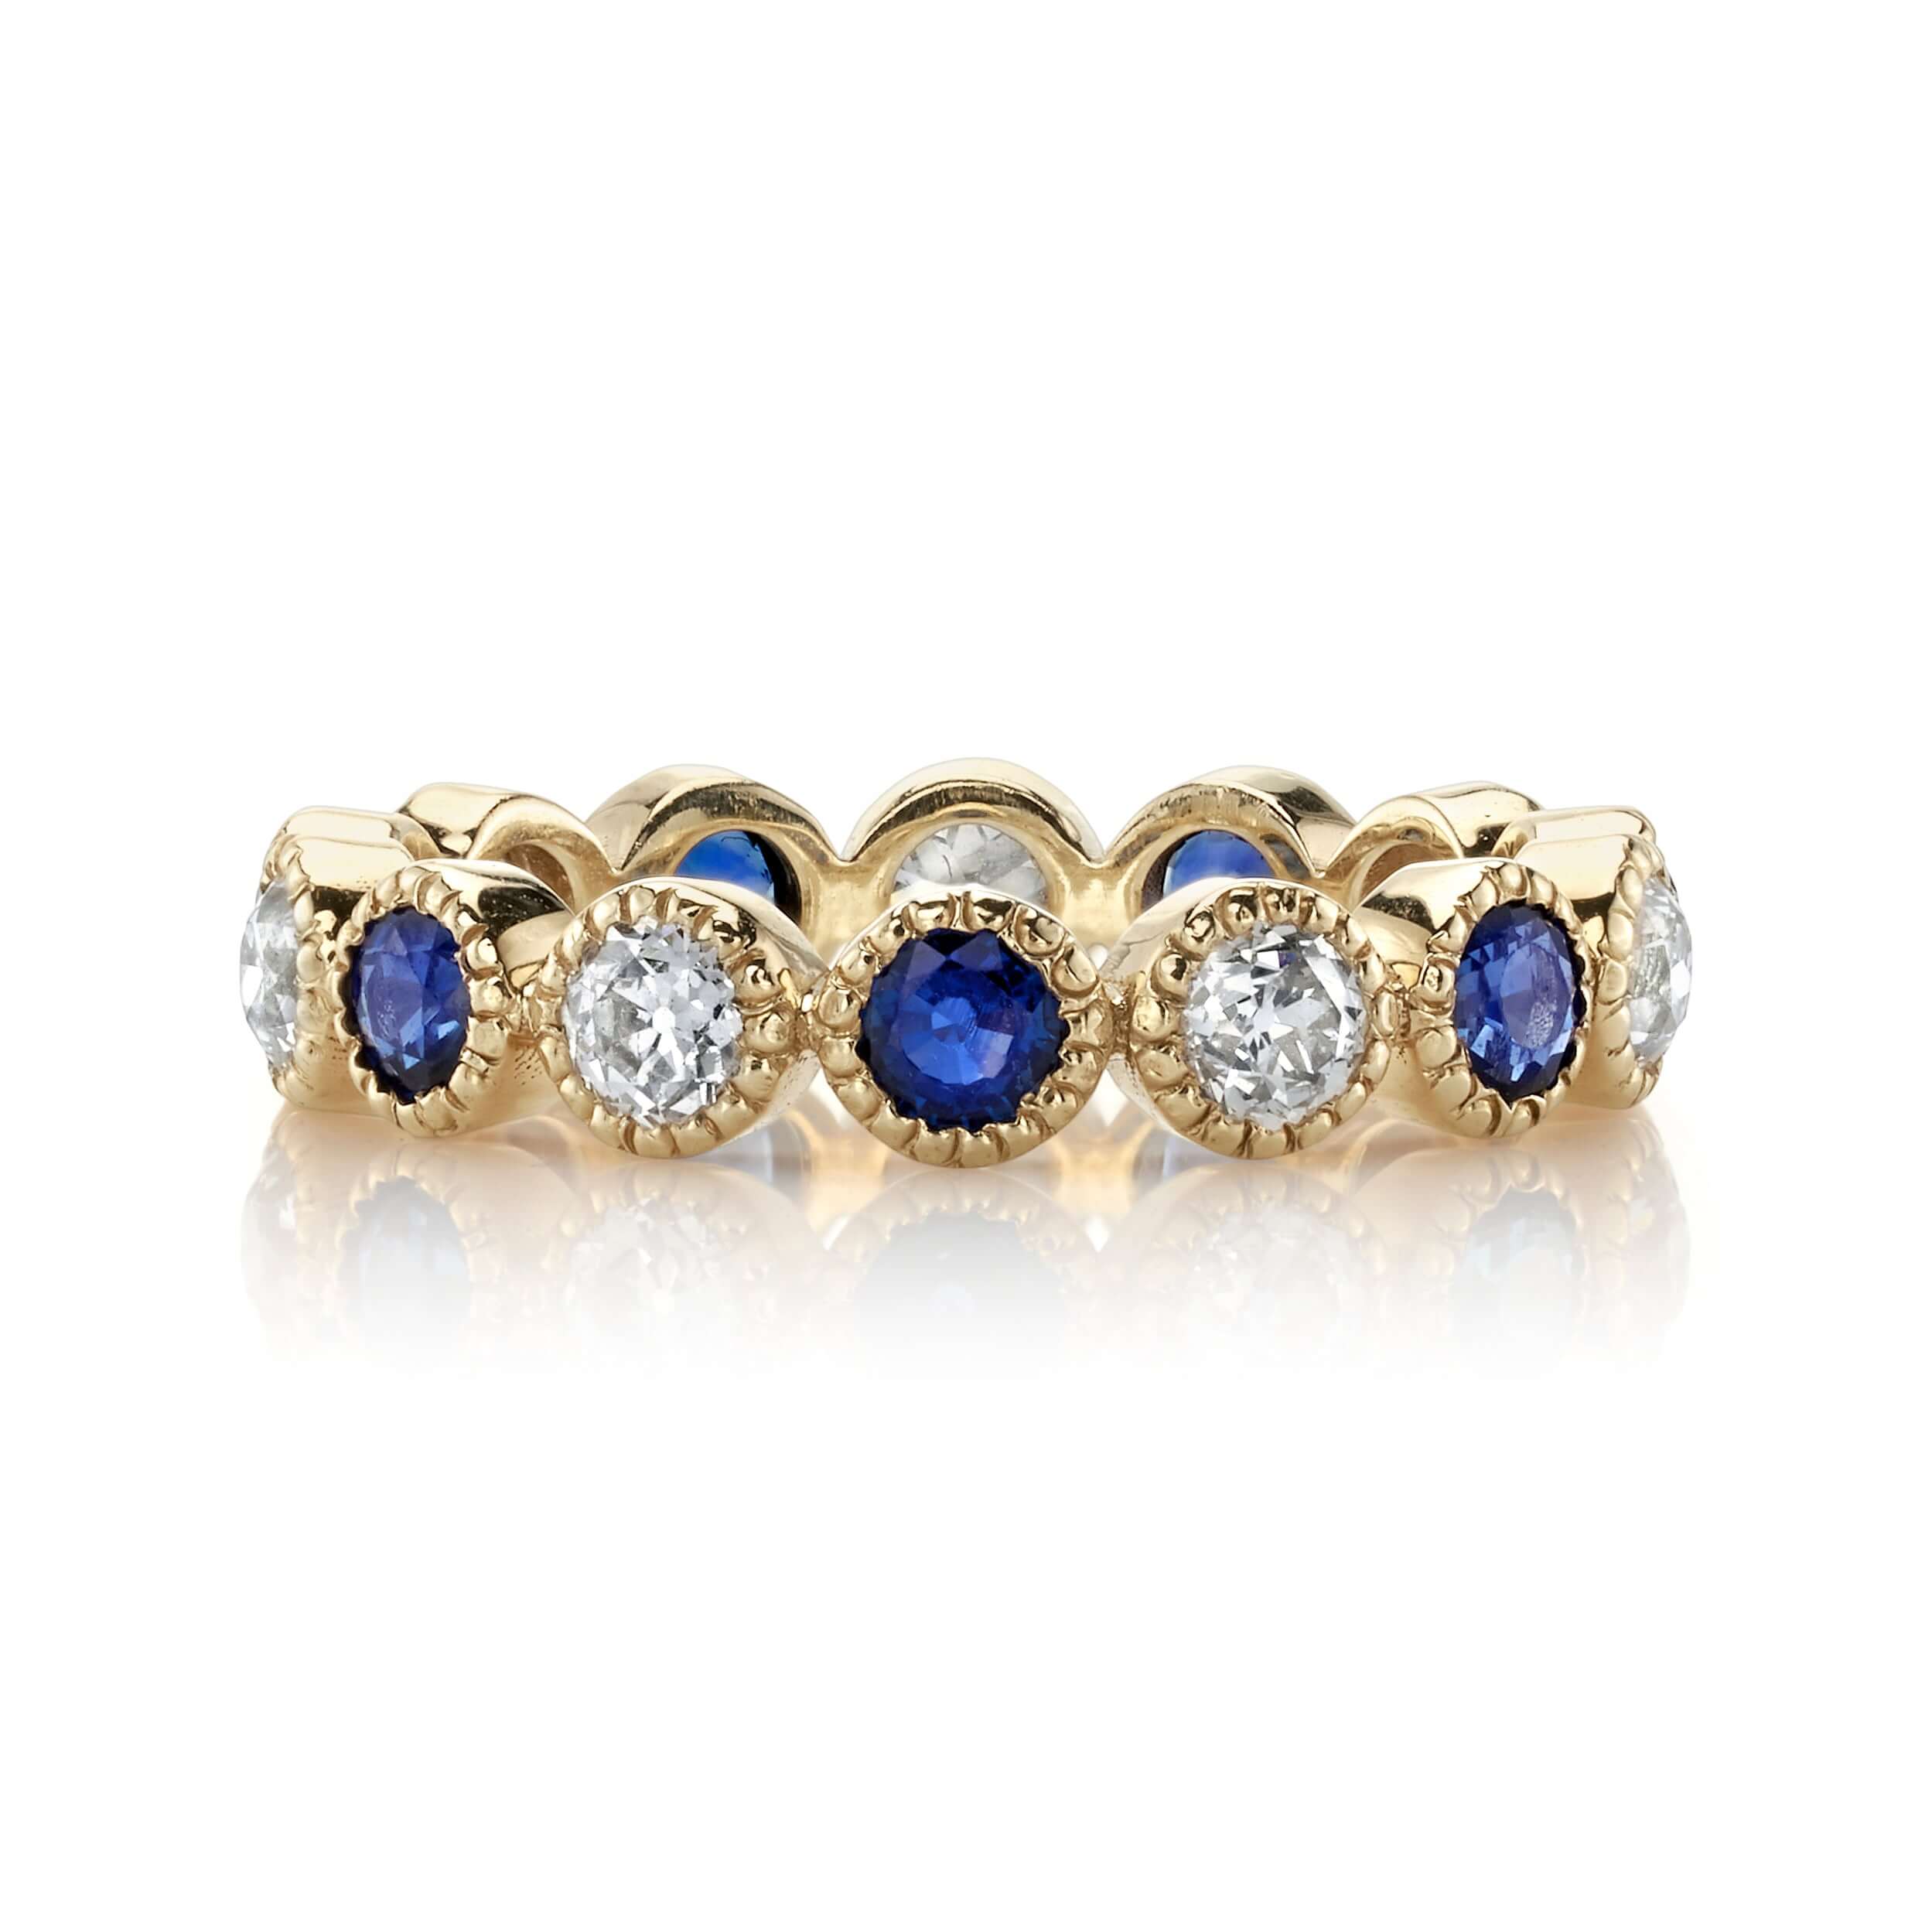 SINGLE STONE MEDIUM GABBY WITH DIAMONDS AND GEMSTONES BAND | Approximately 0.95ctw G-H/VS-SI old European cut diamonds and 1.20ctw round cut color gemstones set in a handcrafted bezel set eternity band. Approximate band width 3.6mm. Please inquire for add